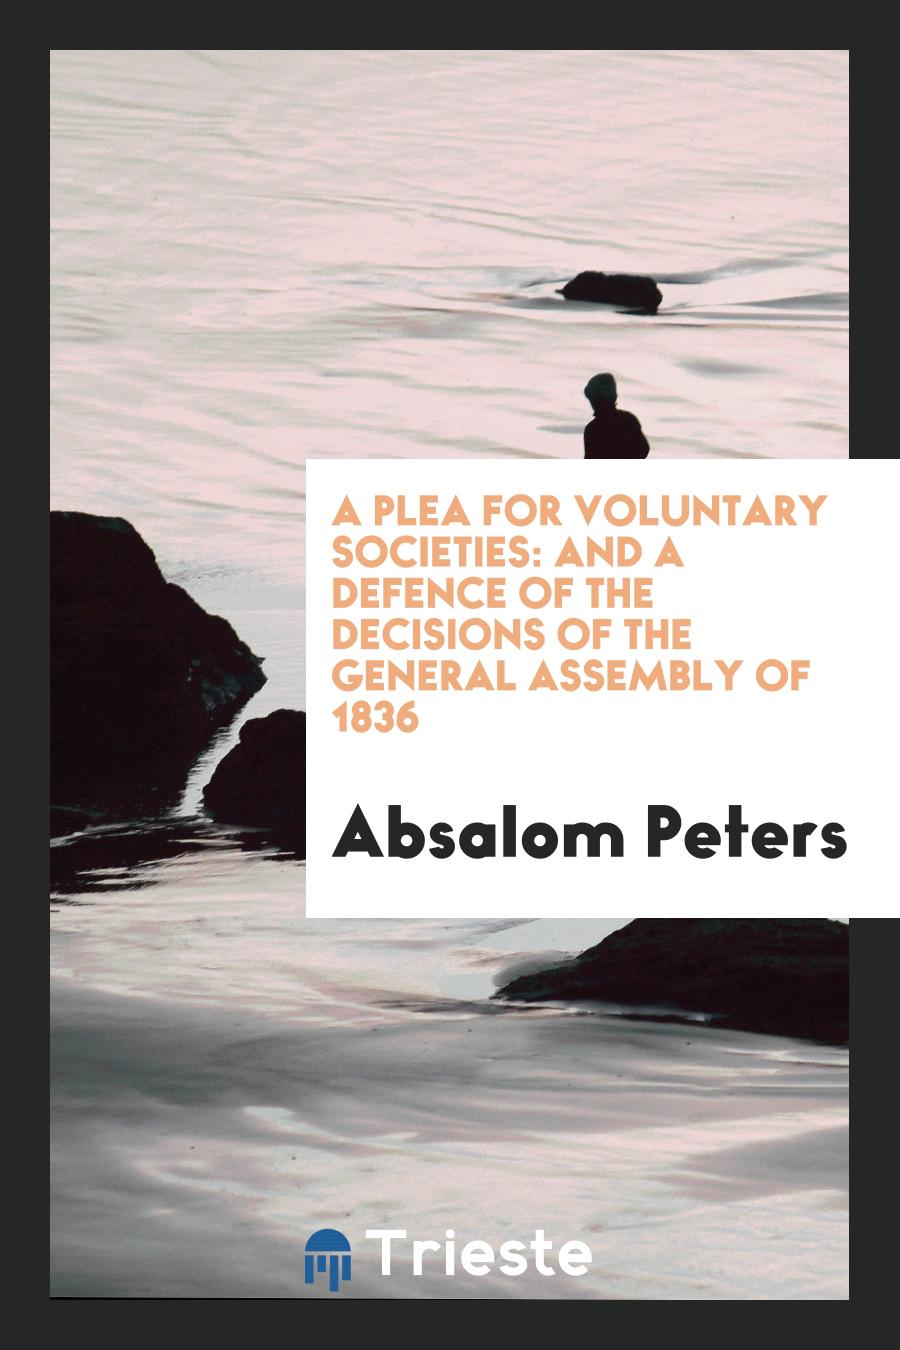 A Plea for Voluntary Societies: And a Defence of the Decisions of the General Assembly of 1836